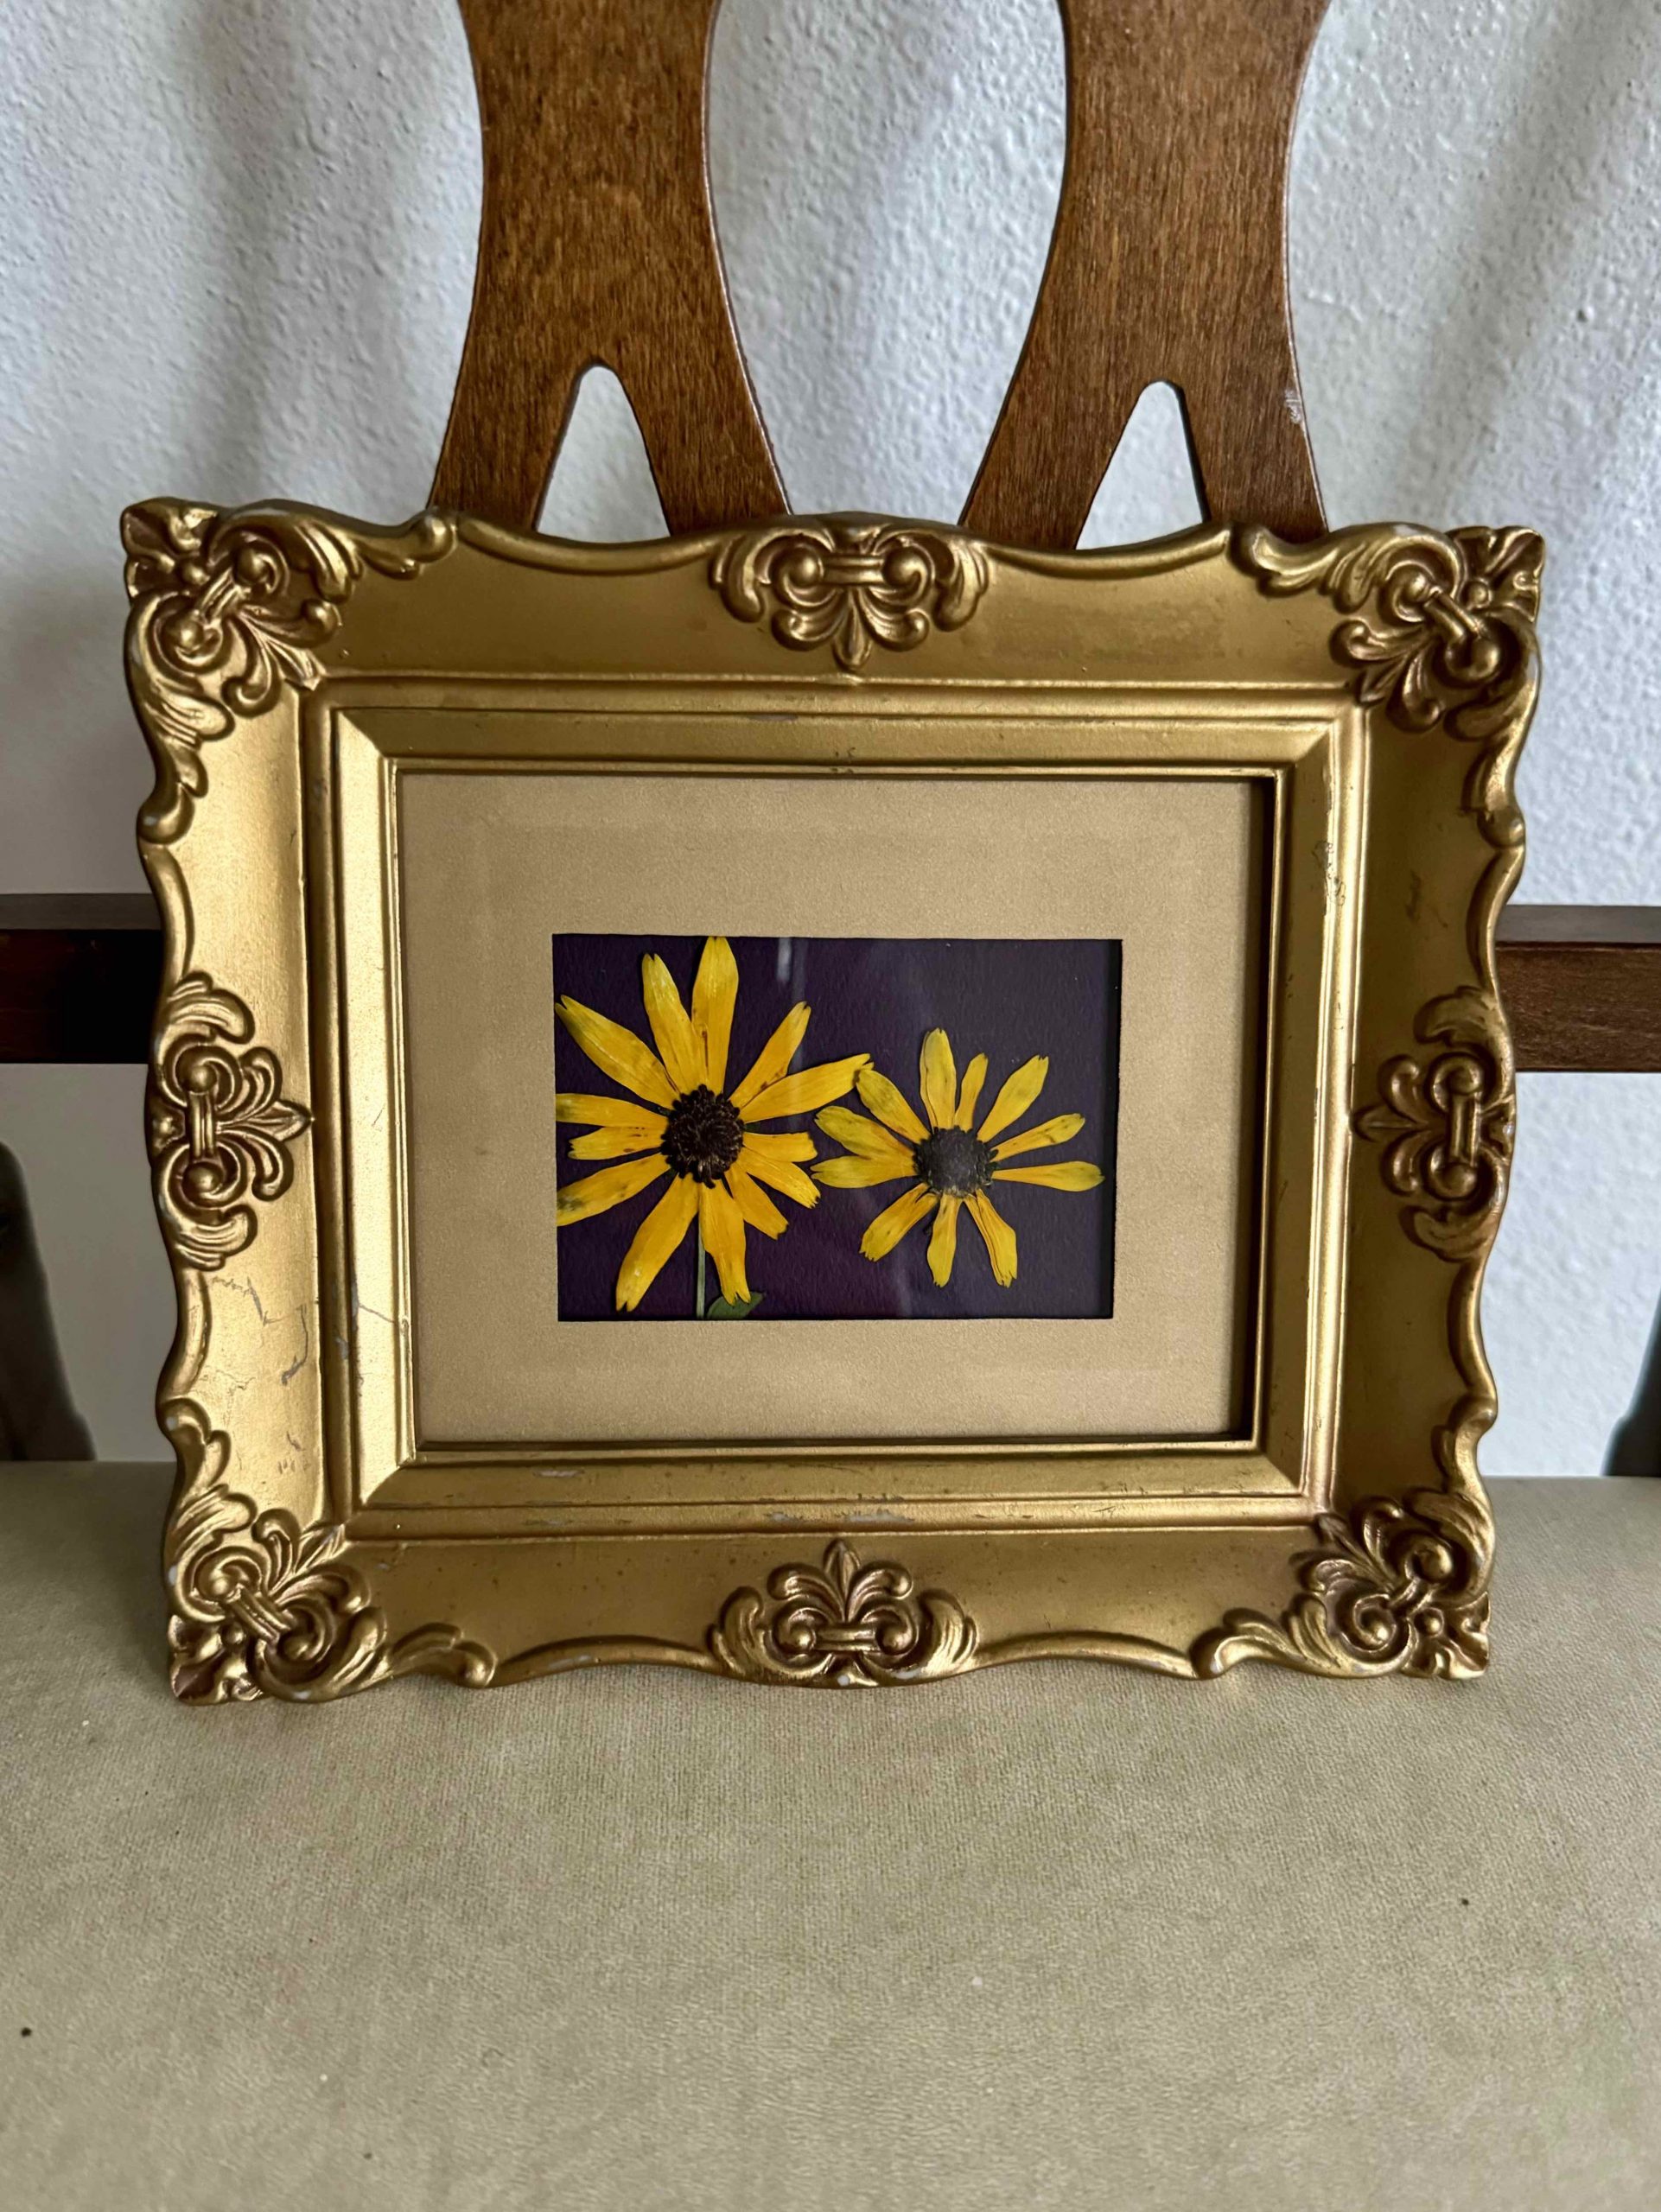 Two pressed black-eyed Susan flowers in a vintage ornate gold frame by Kindness Roots